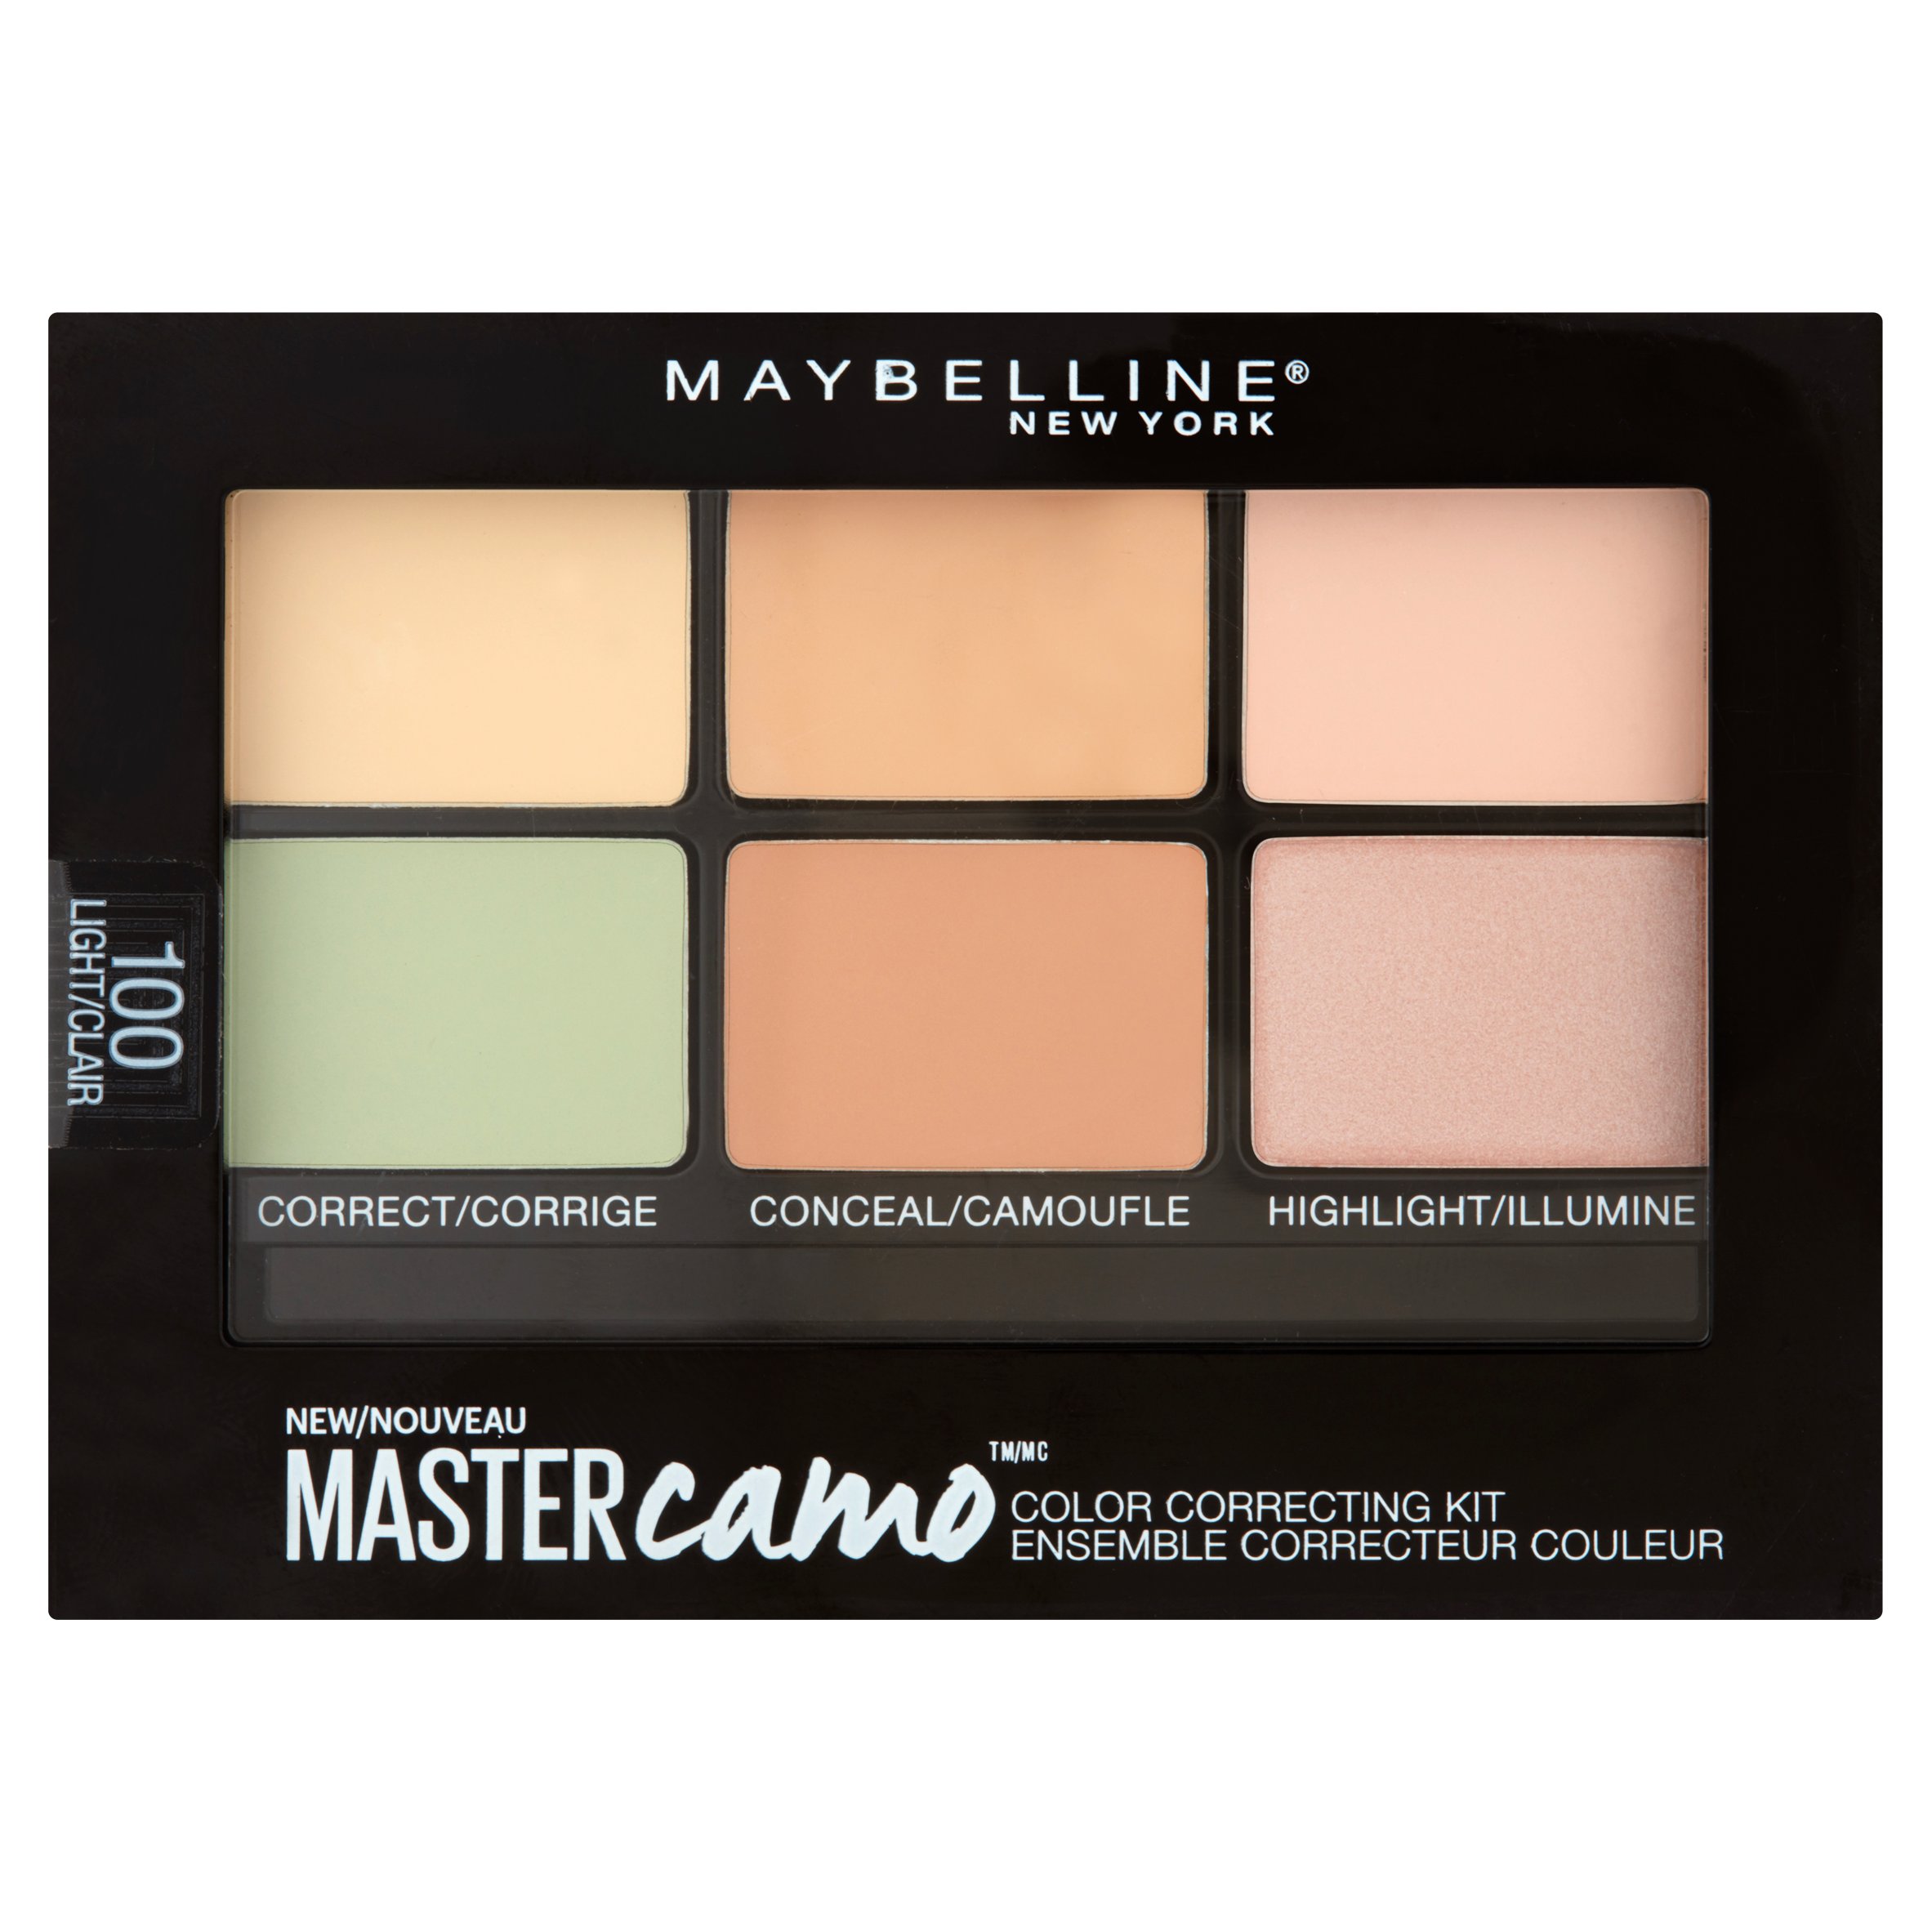 Maybelline New York Facestudio Master Camo Color Correcting Kit - image 1 of 6